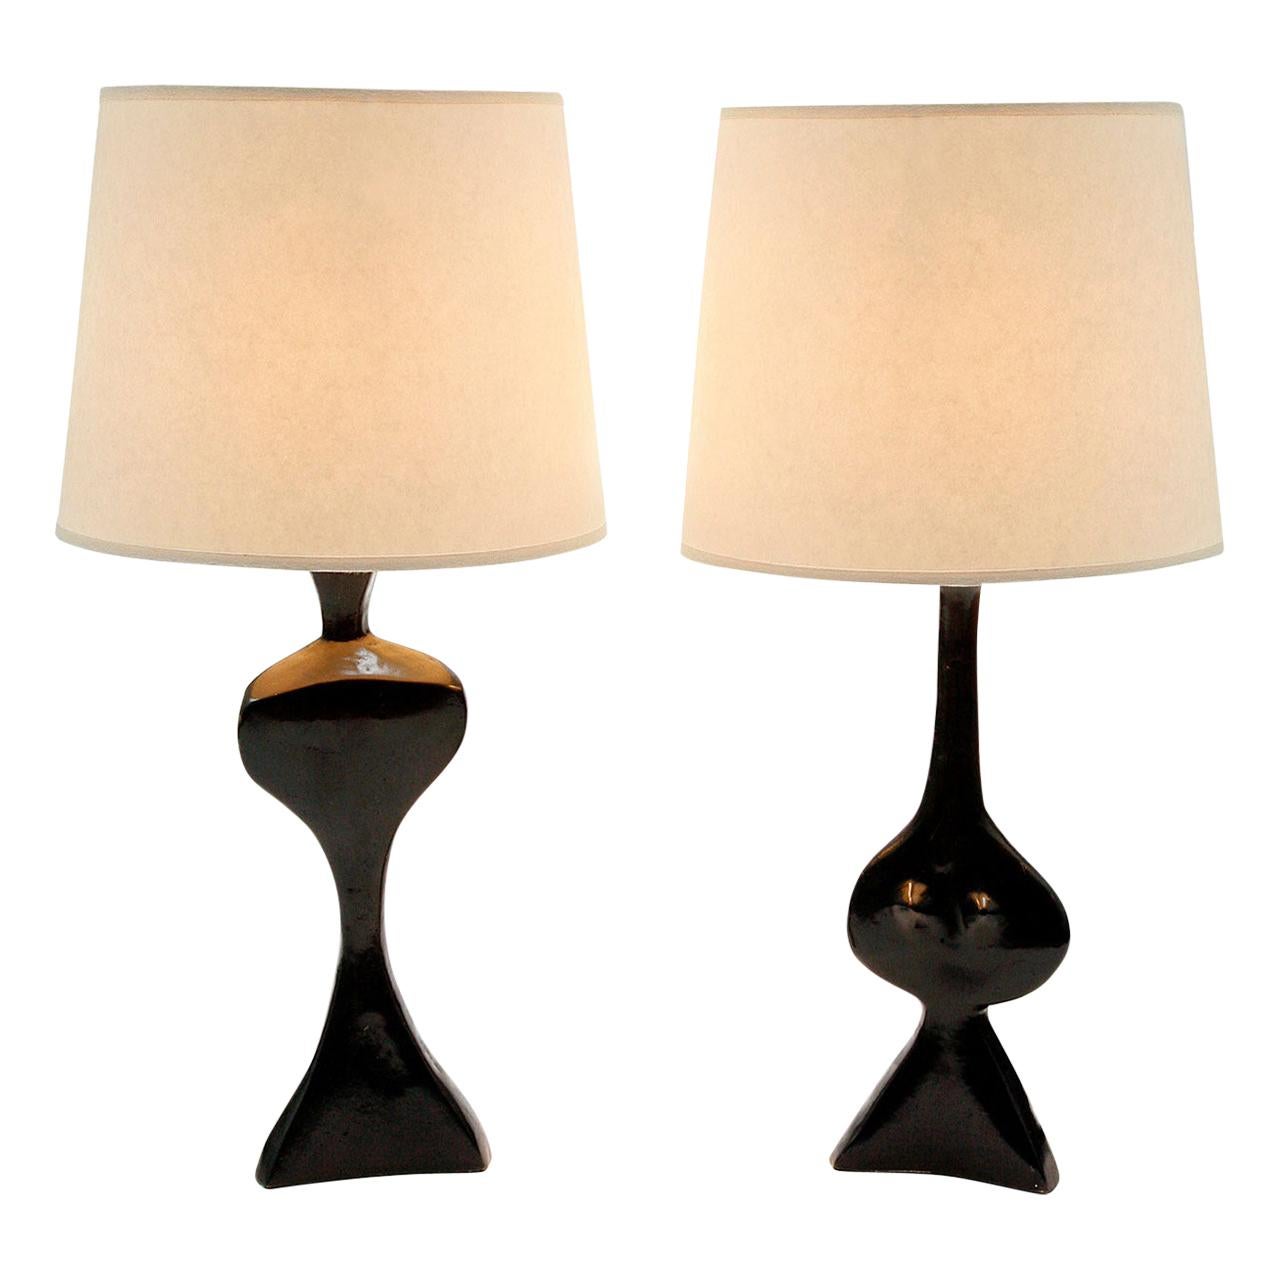 Pair of Table Lamps in Bronze by Jacques Jarrige "Adam and Eve"